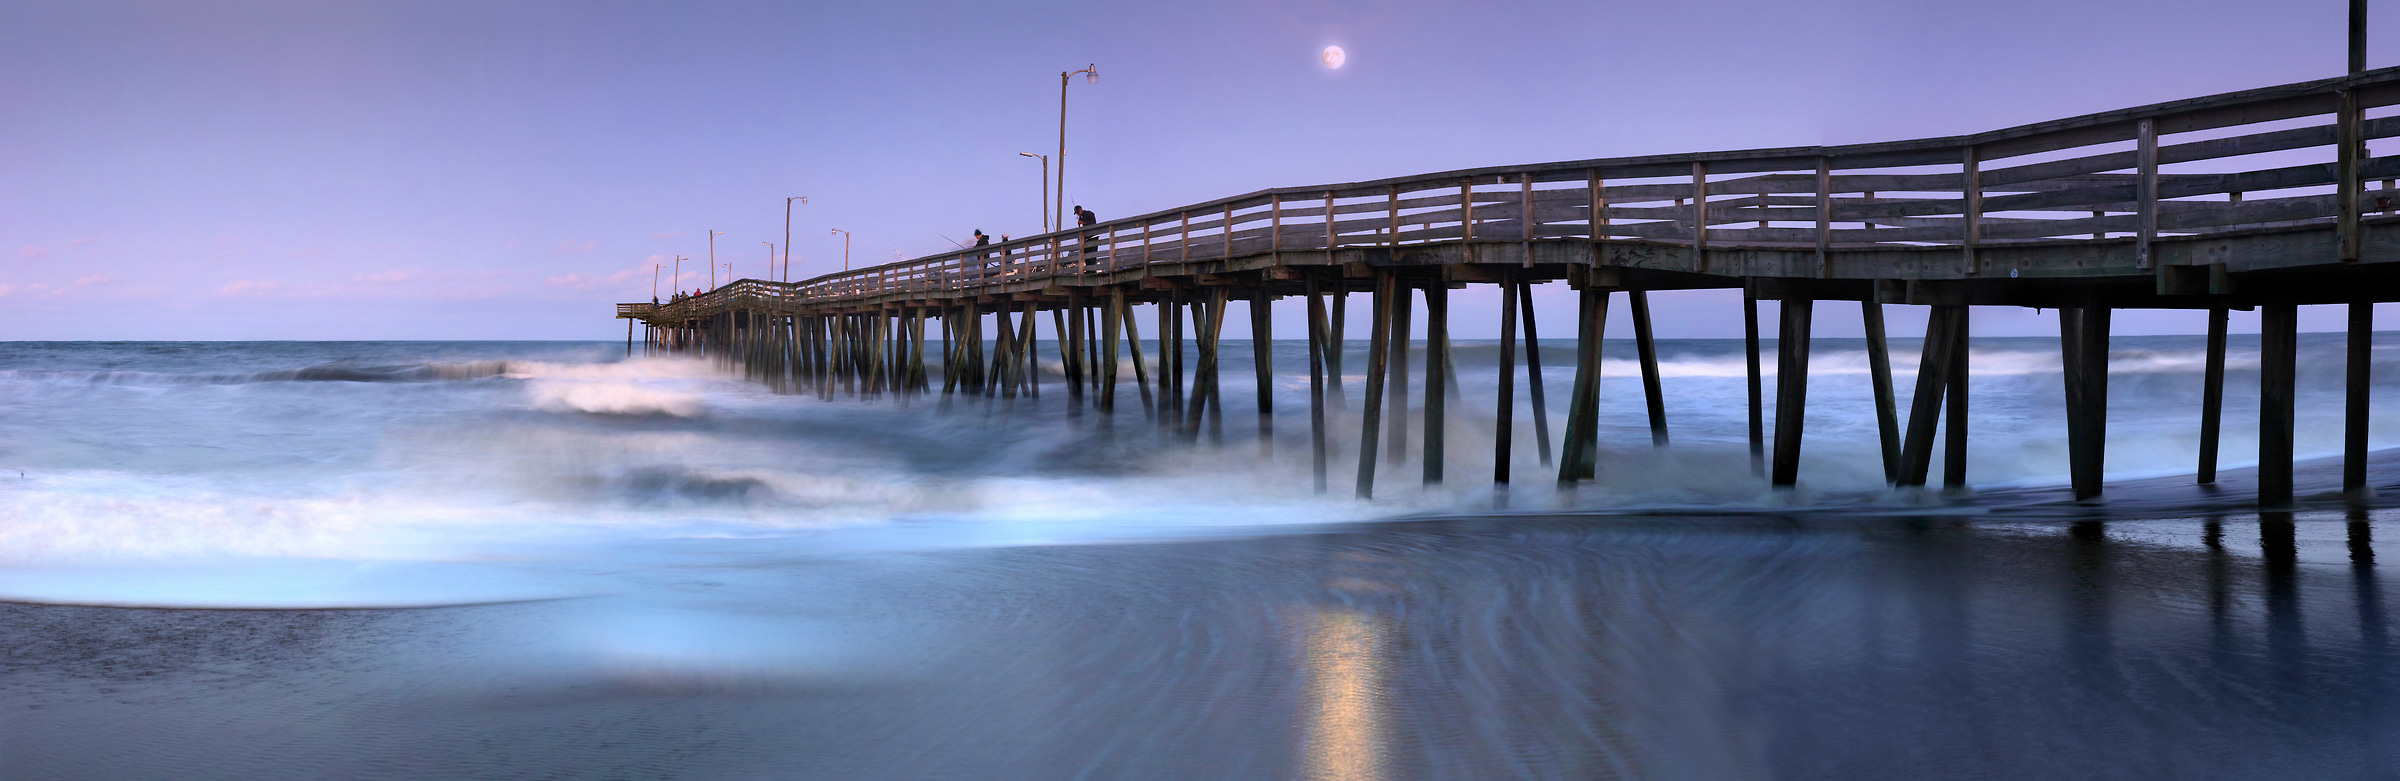 293 megapixels! A very high resolution, large-format VAST photo print of a pier on the beach at dusk with the moon in the background; photograph created by Phil Crawshay in Virginia Beach Pier, Virginia